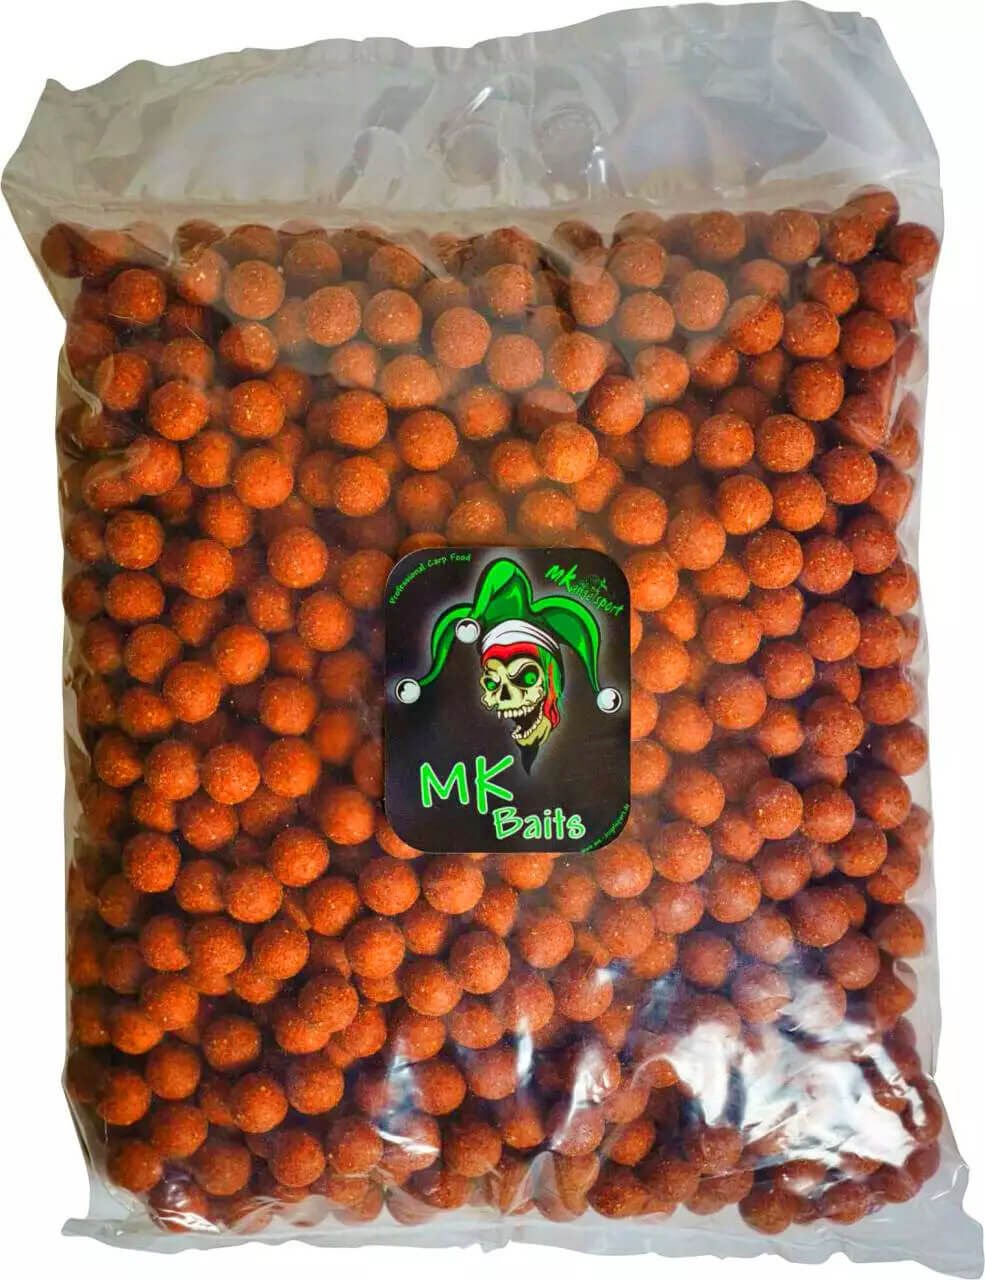 MK Coco Banane Boilies 20mm 5kg - Power Instant Boilie